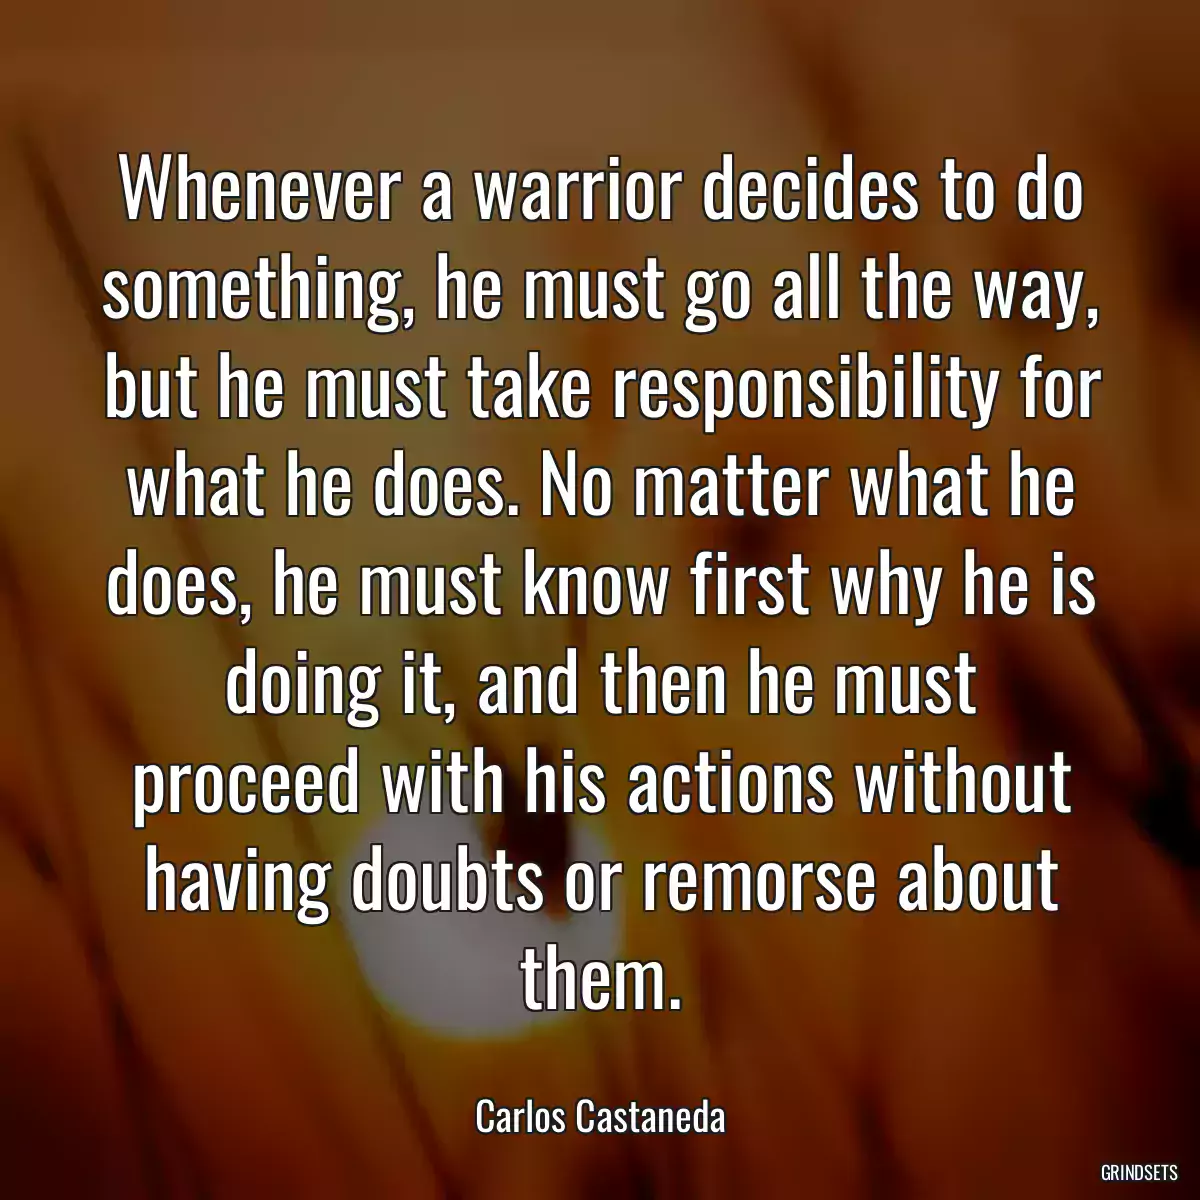 Whenever a warrior decides to do something, he must go all the way, but he must take responsibility for what he does. No matter what he does, he must know first why he is doing it, and then he must proceed with his actions without having doubts or remorse about them.